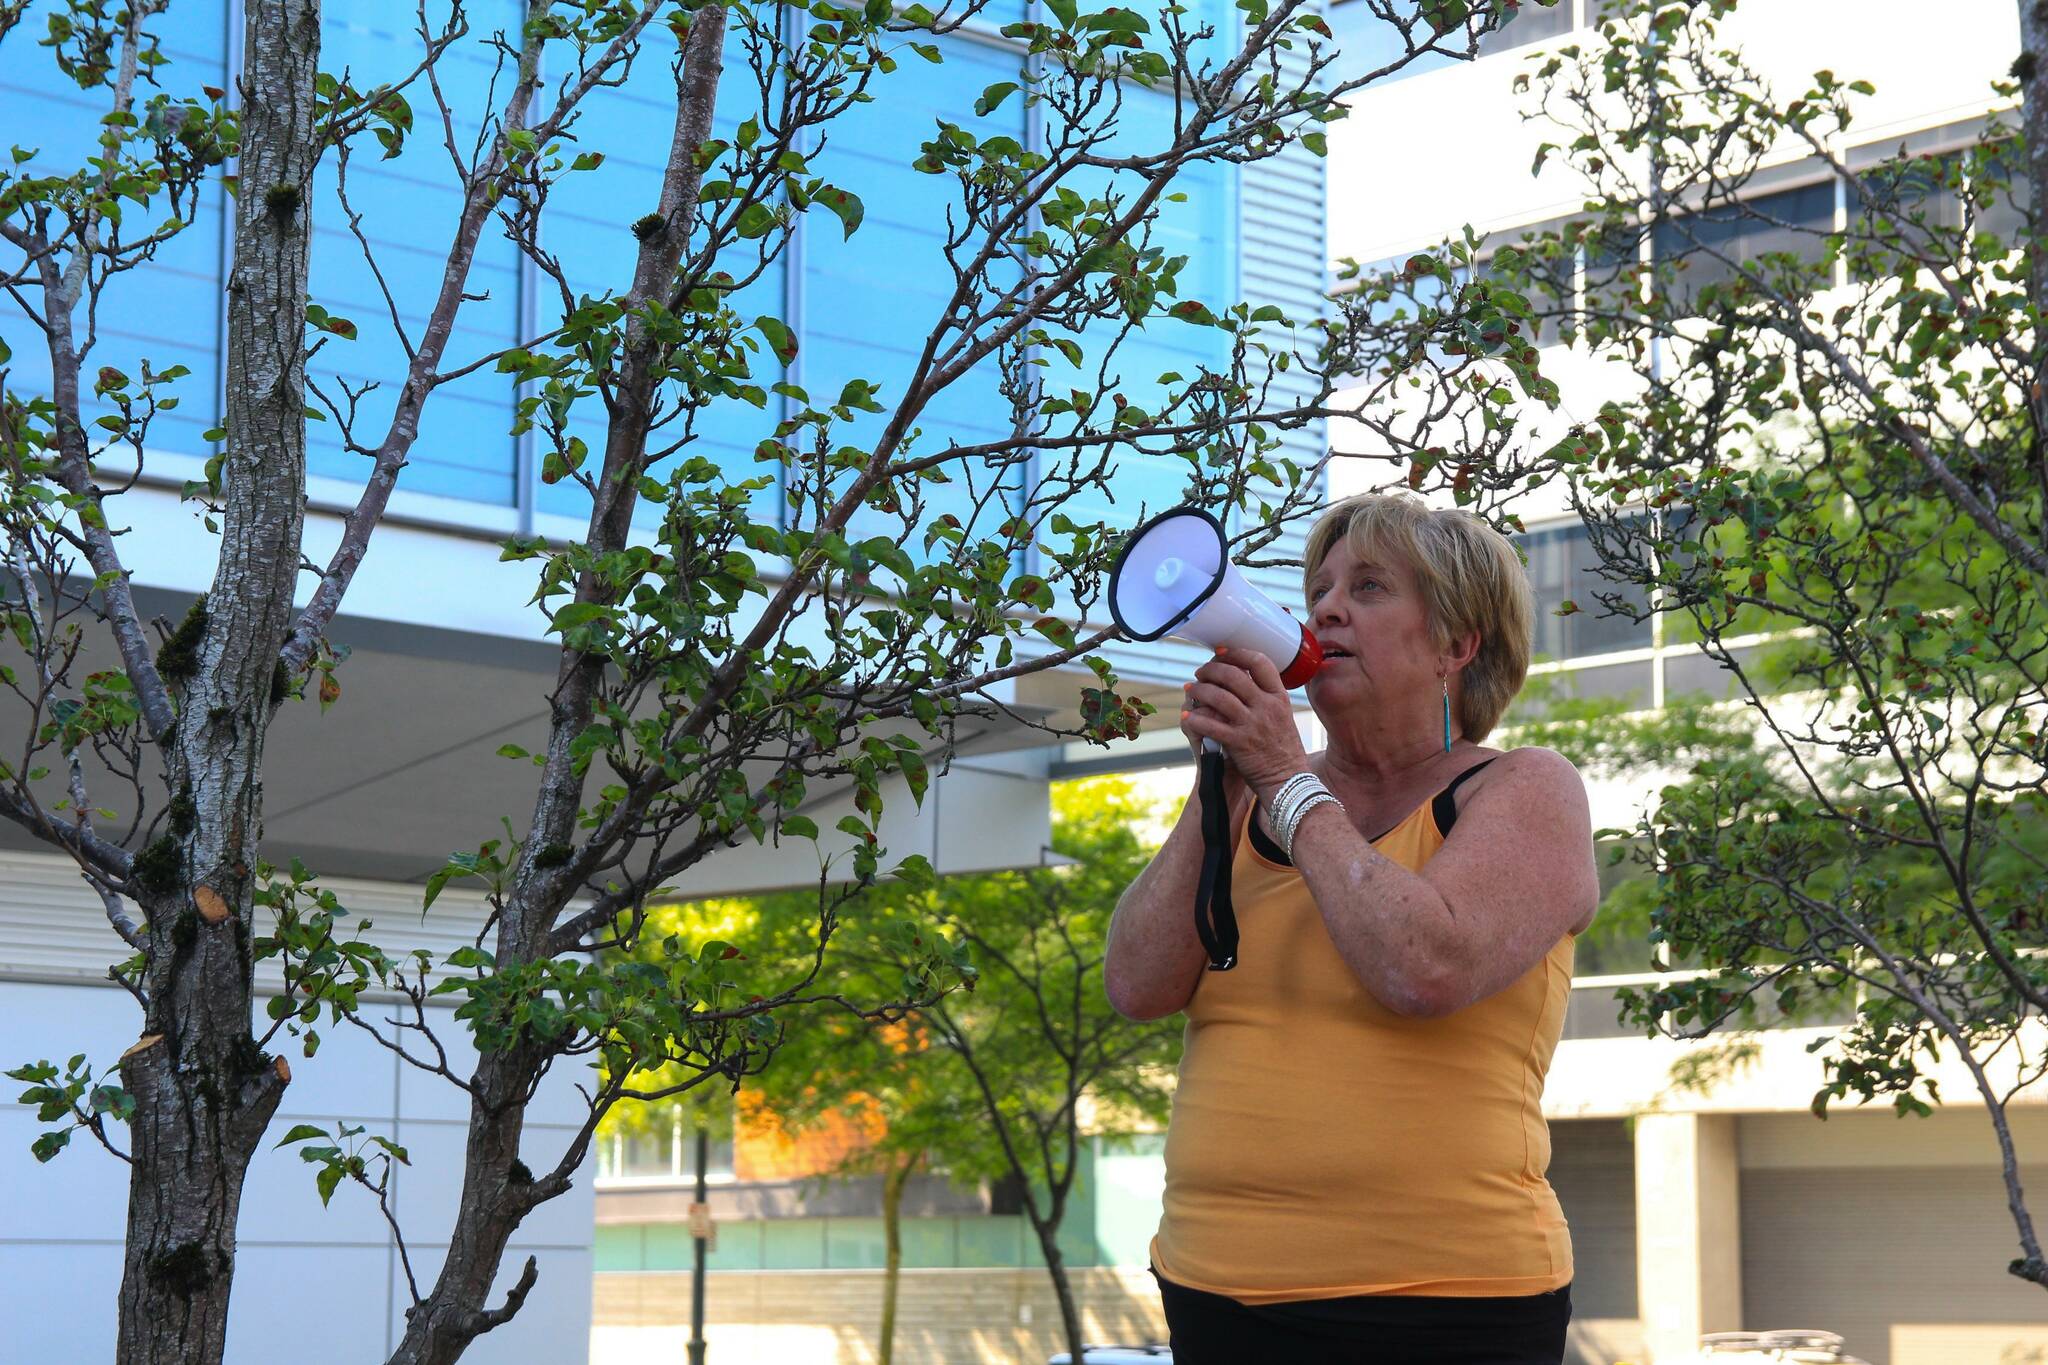 Photo by Luisa Loi/Whidbey News-Times
Patrice Huth protested in front of the Snohomish County Jail for over two hours.